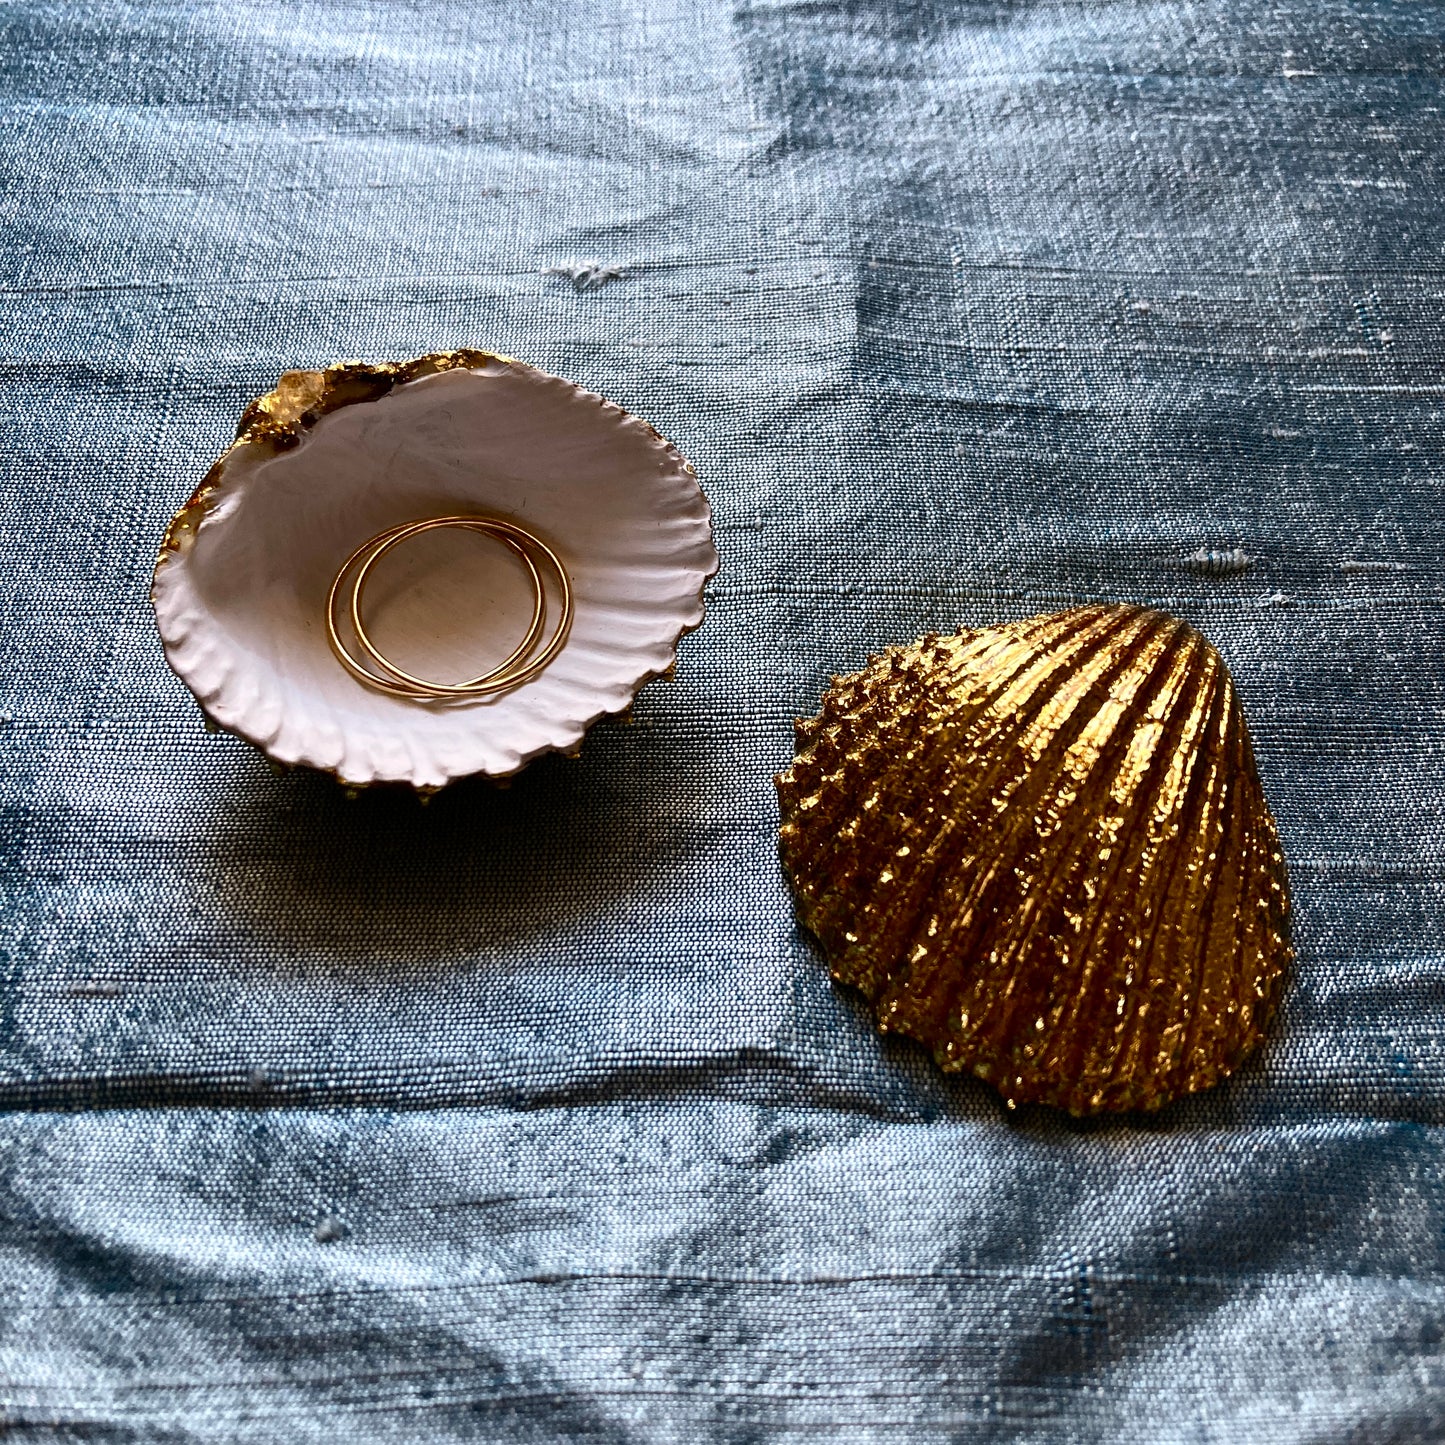 Sea Shell dishes